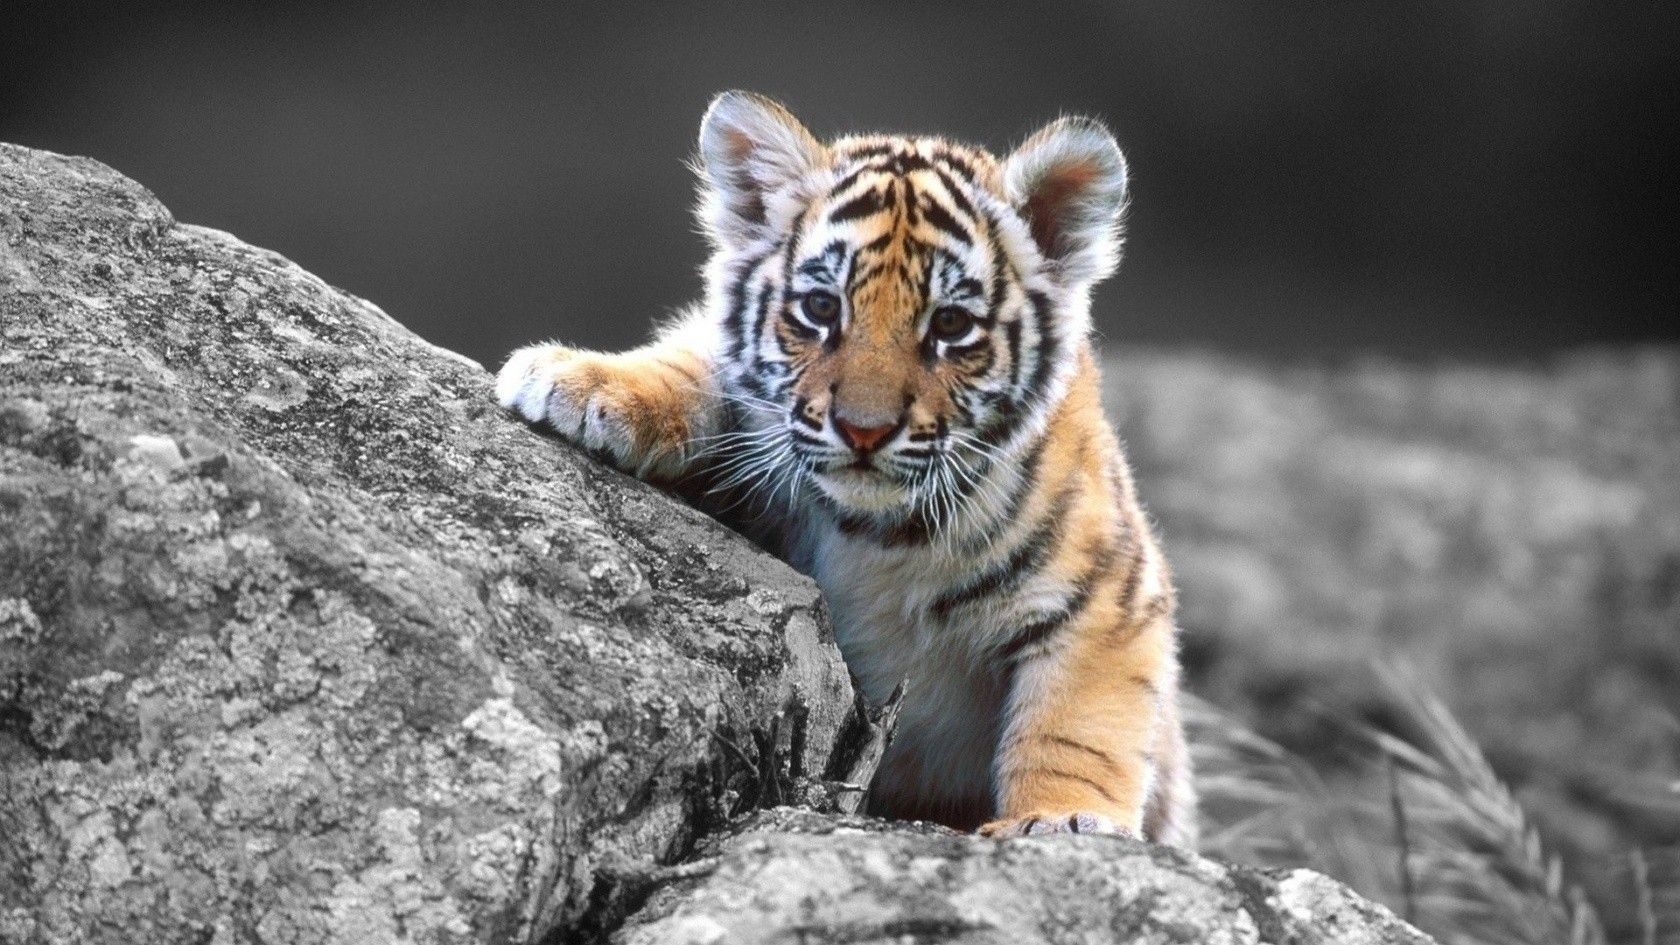 Animated Tiger Wallpapers